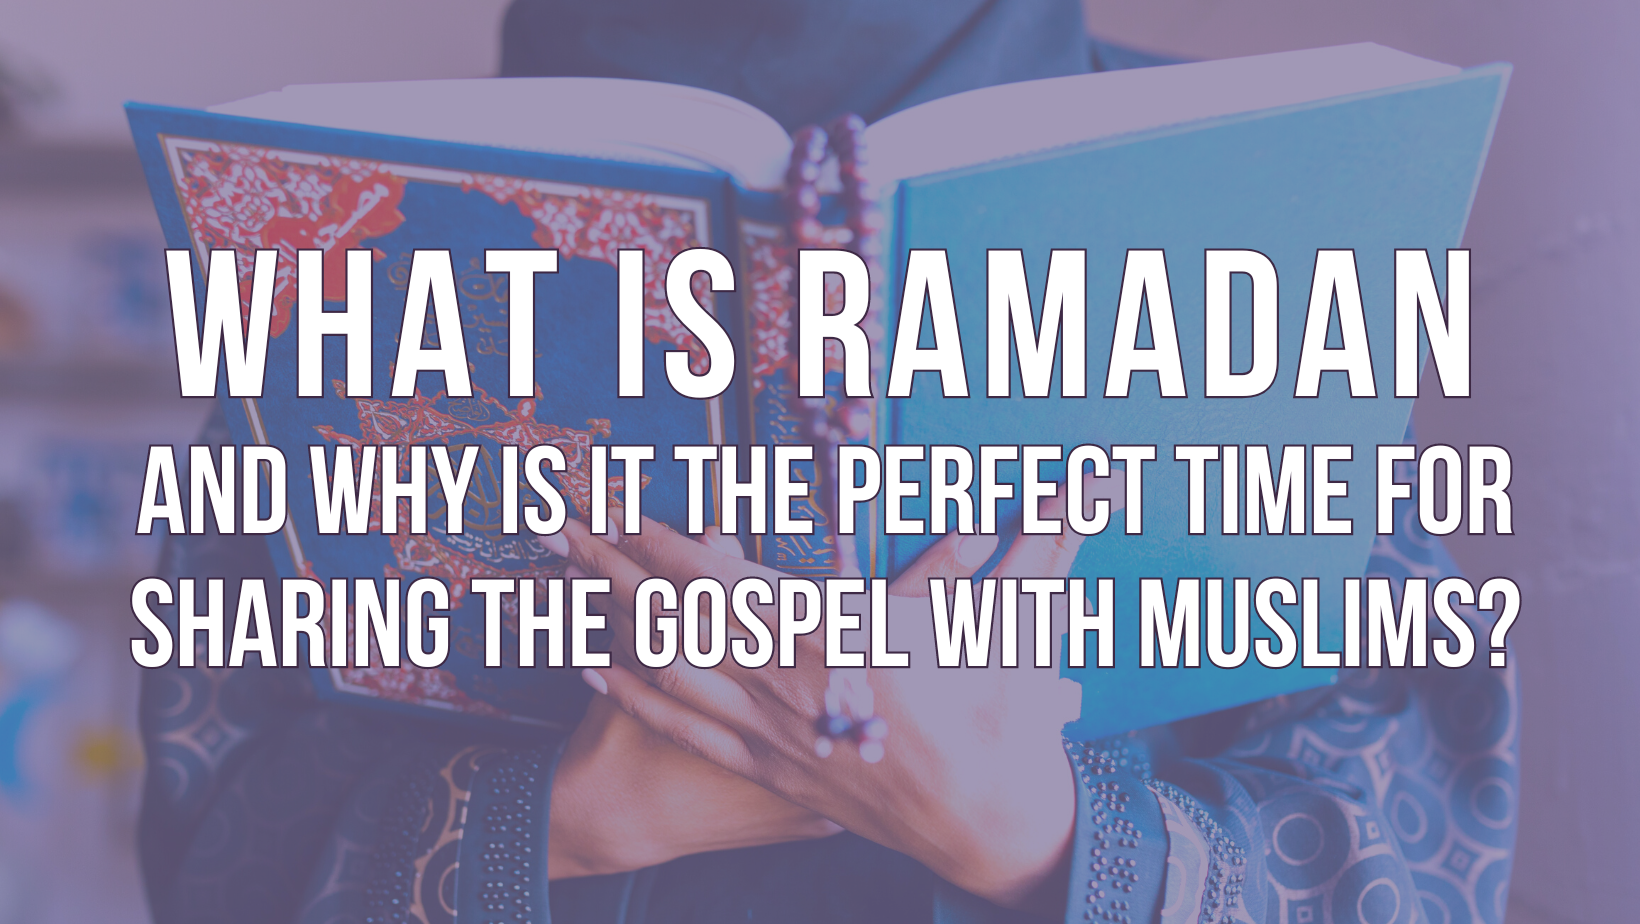 What is Ramadan and why is it the perfect time for sharing the gospel with Muslims